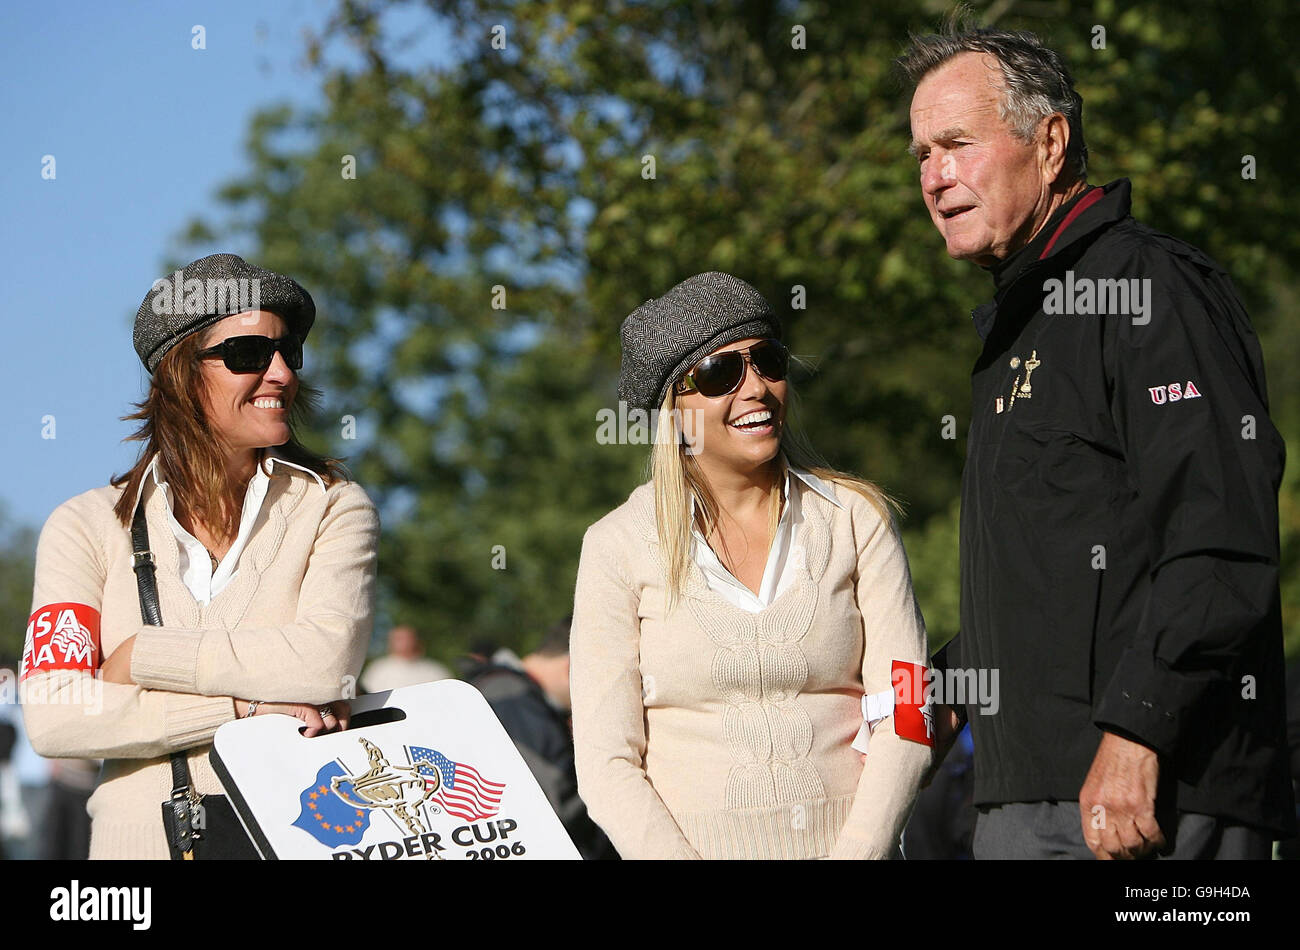 Former US President, George Bush talks to Amy Mickelson (centre) and Amy Di Marco during Day One of the Ryder Cup at the K-Club, Co Kildare, Ireland. Picture date: Friday September 22, 2006. Match Three, Fourballs: USA's Phil Mickelson and Chris Di Marco v Europe's Darren Clarke and Lee Westwood. Photo Credit should read: David Davies/PA Stock Photo